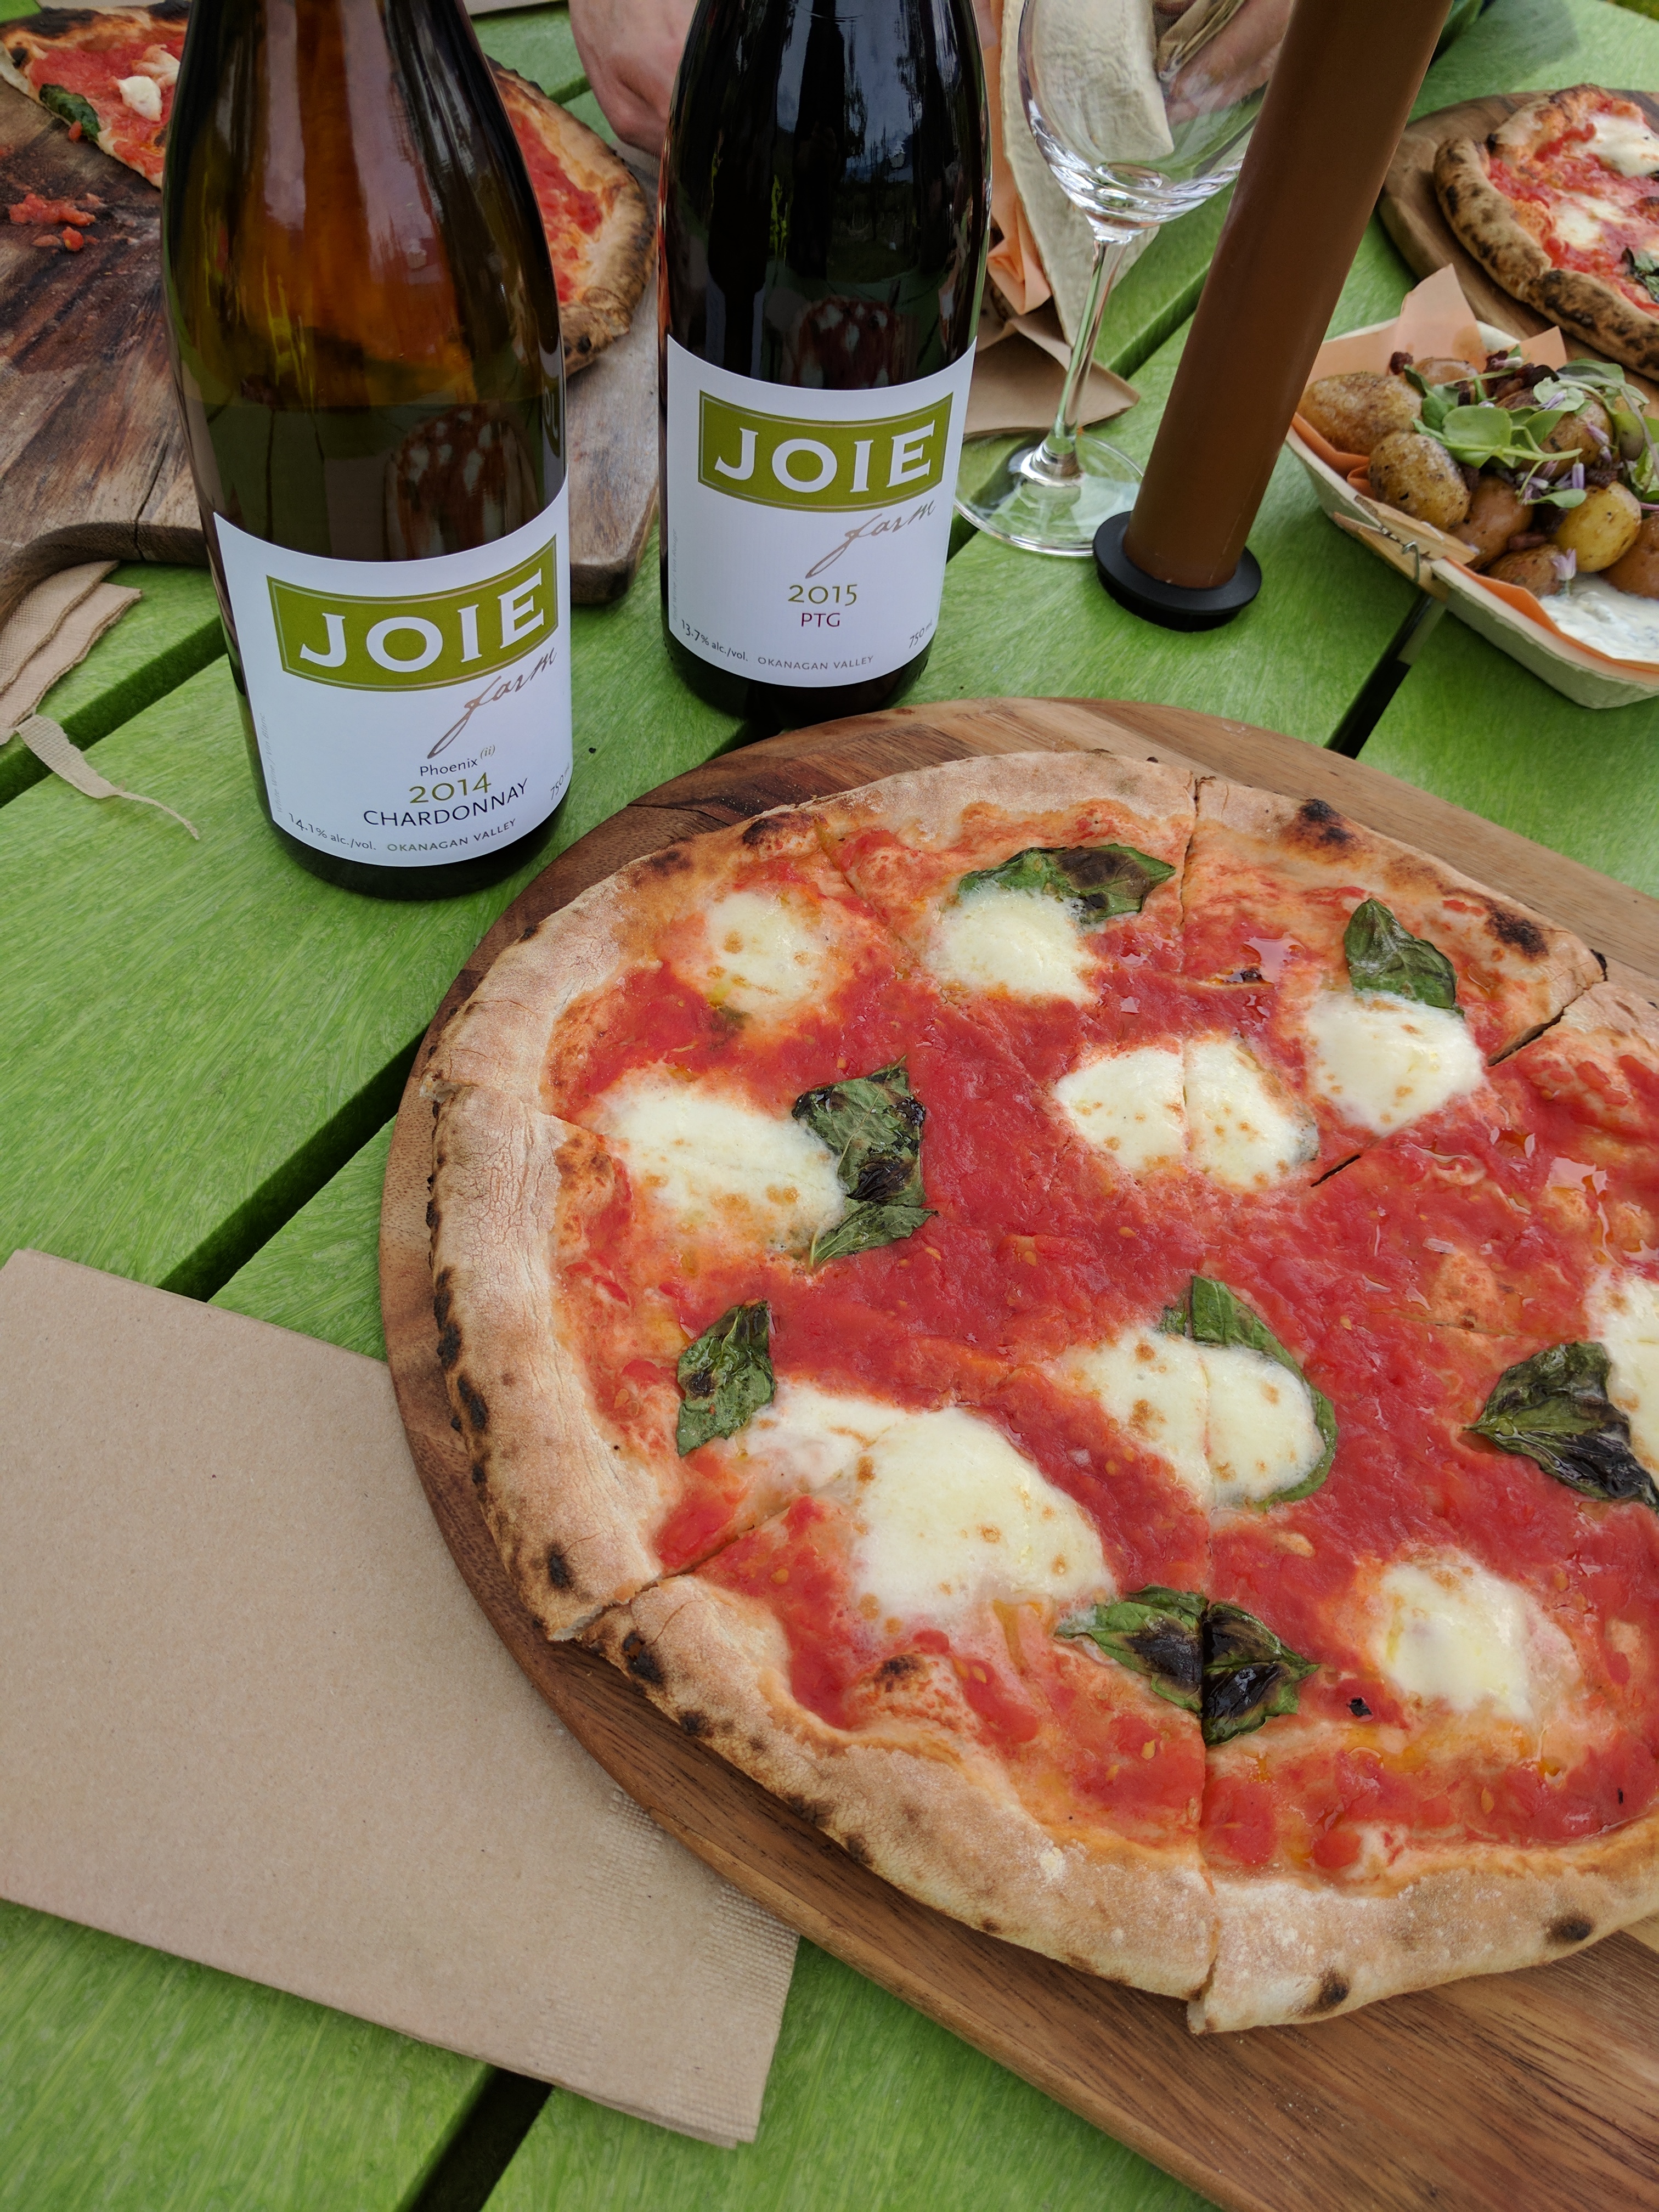 Pizza and wine at Joie Piqnique